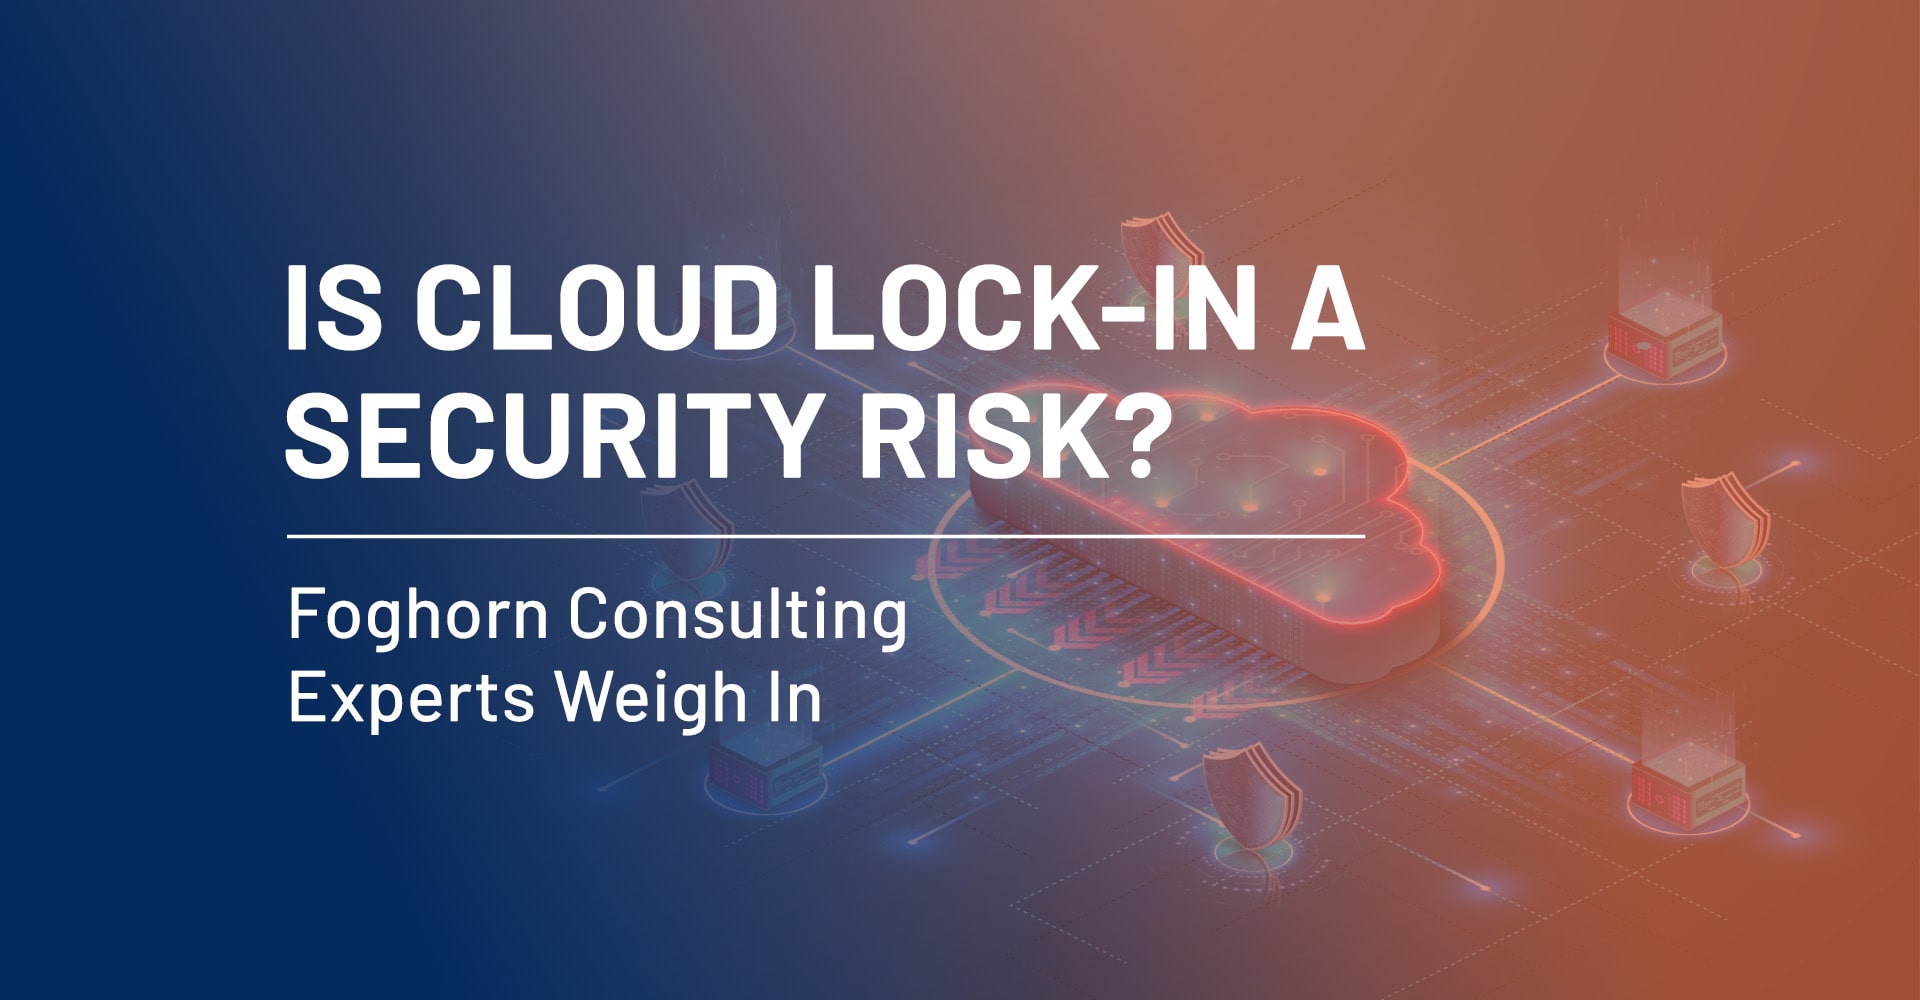 Is Cloud Lock-In a Security Risk - Foghorn Consulting Experts Weigh In